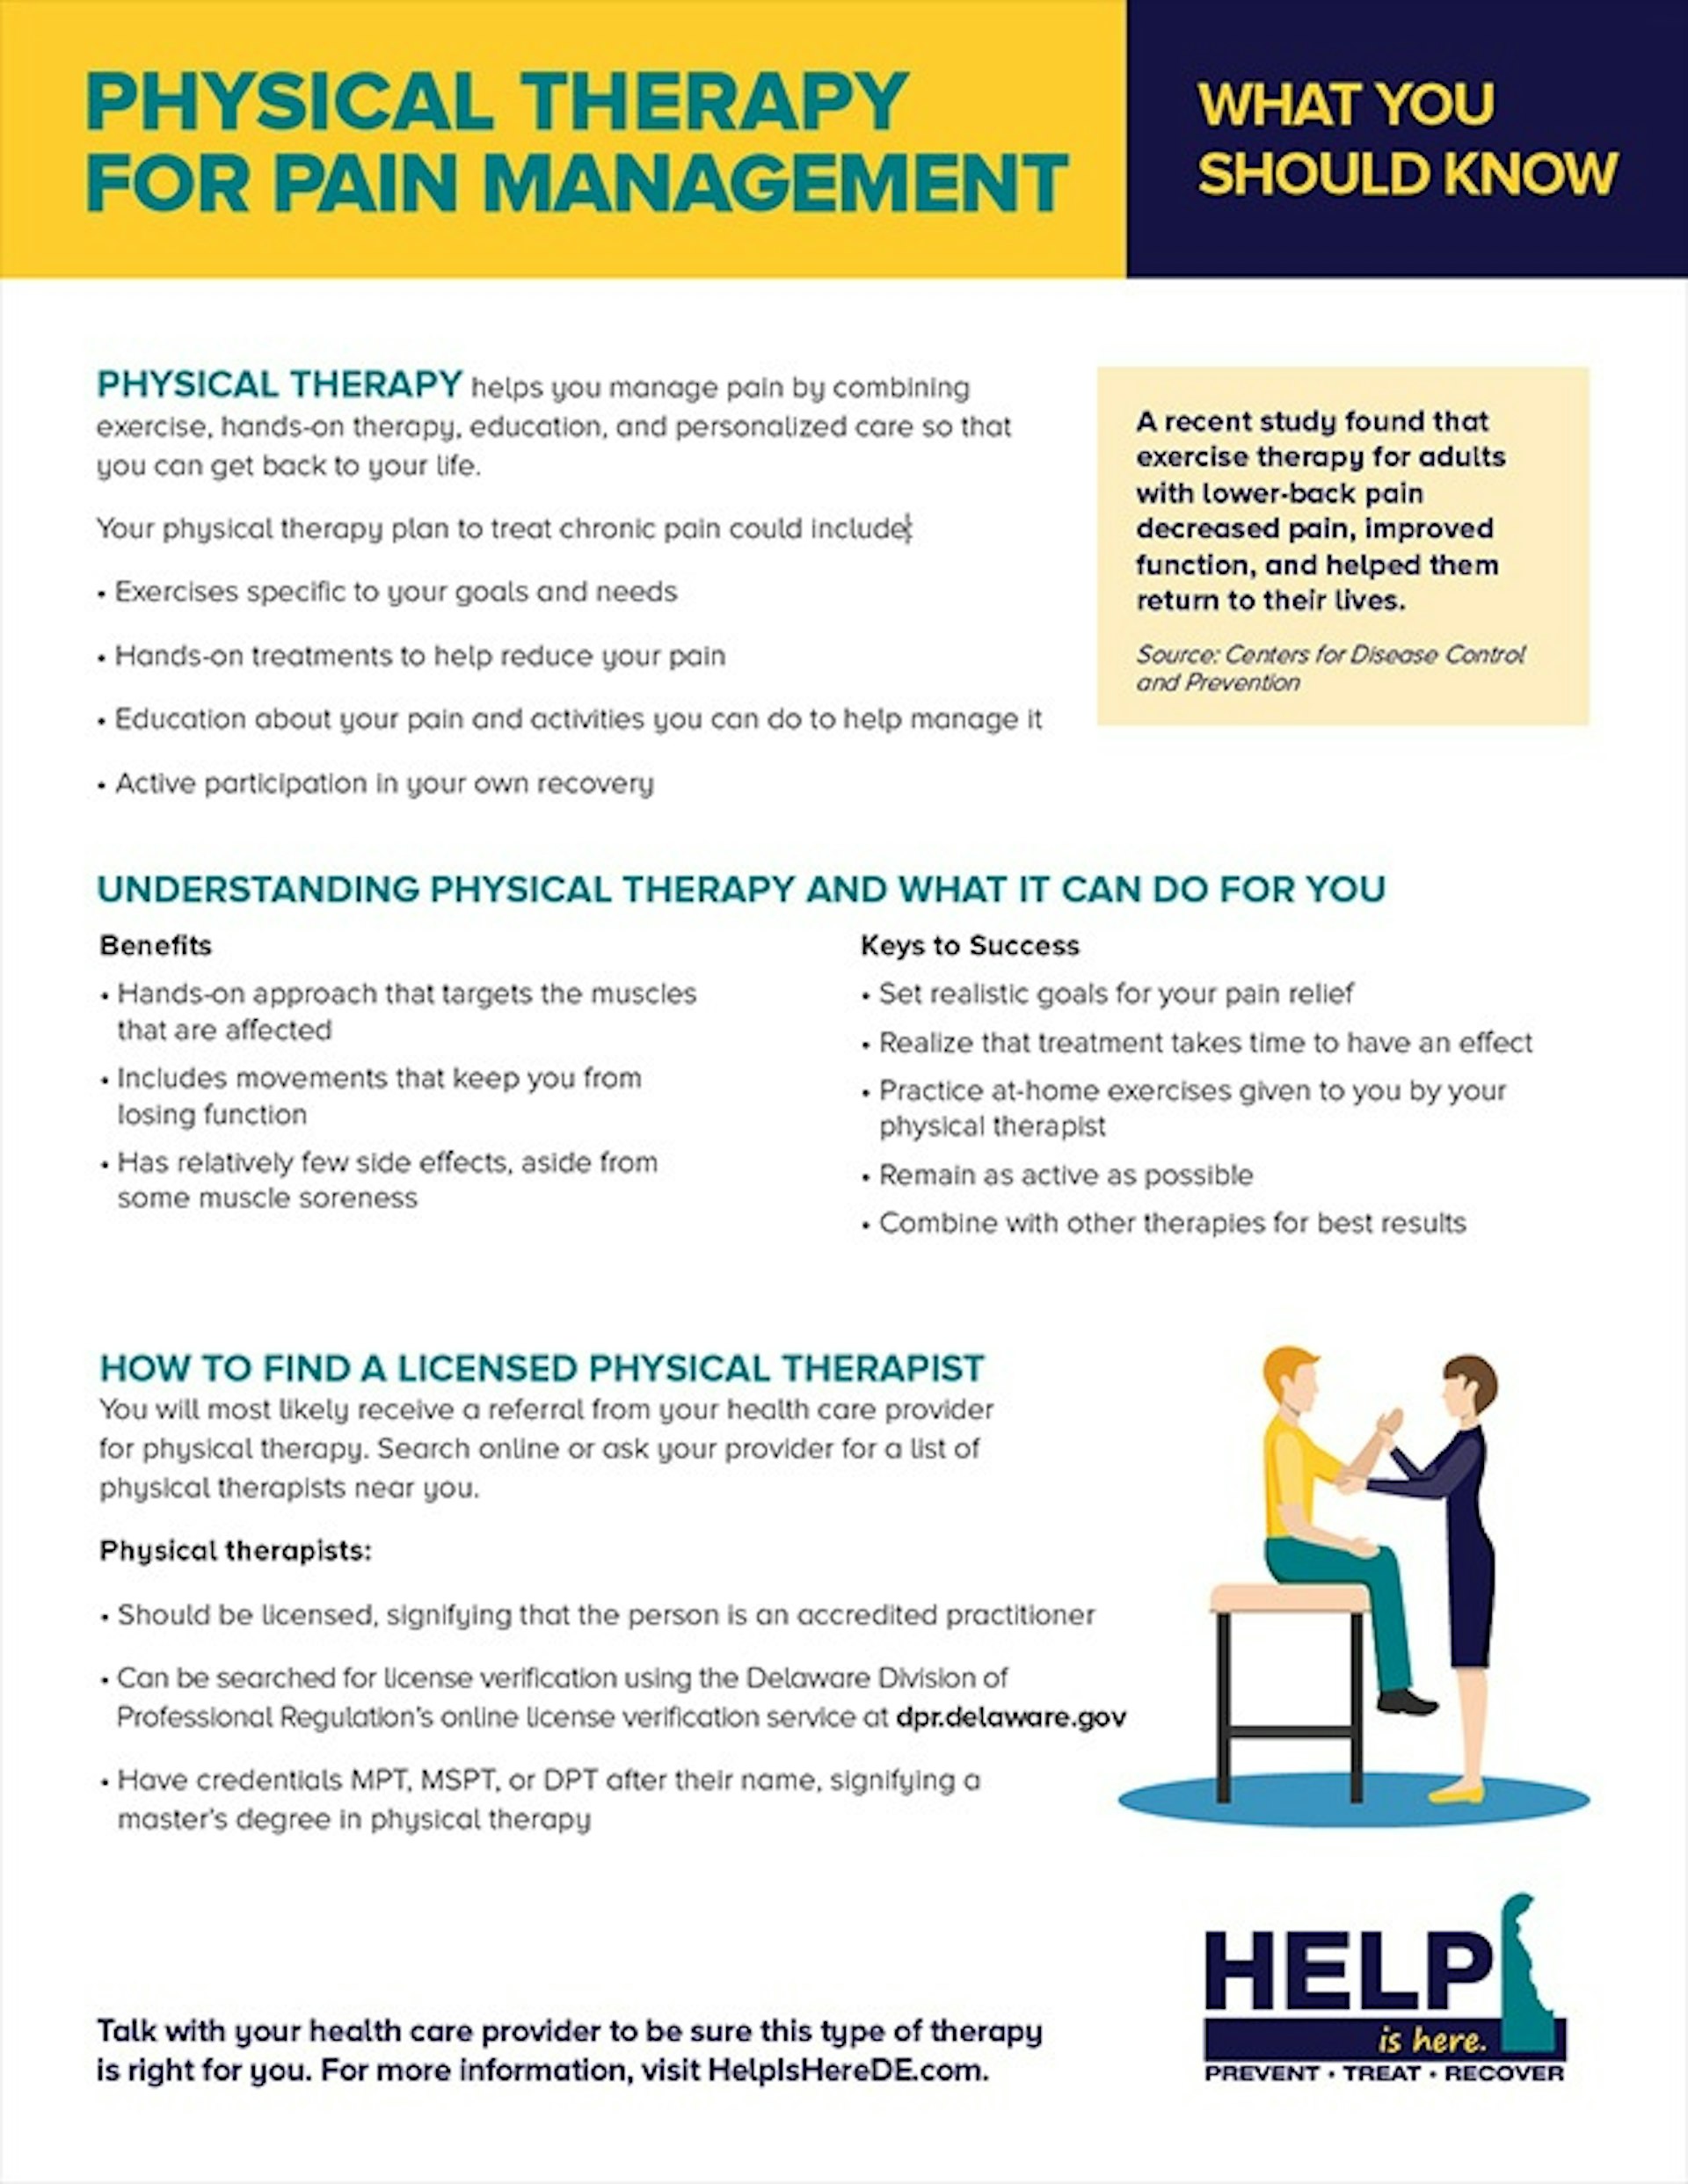 Physical Therapy for Pain Management